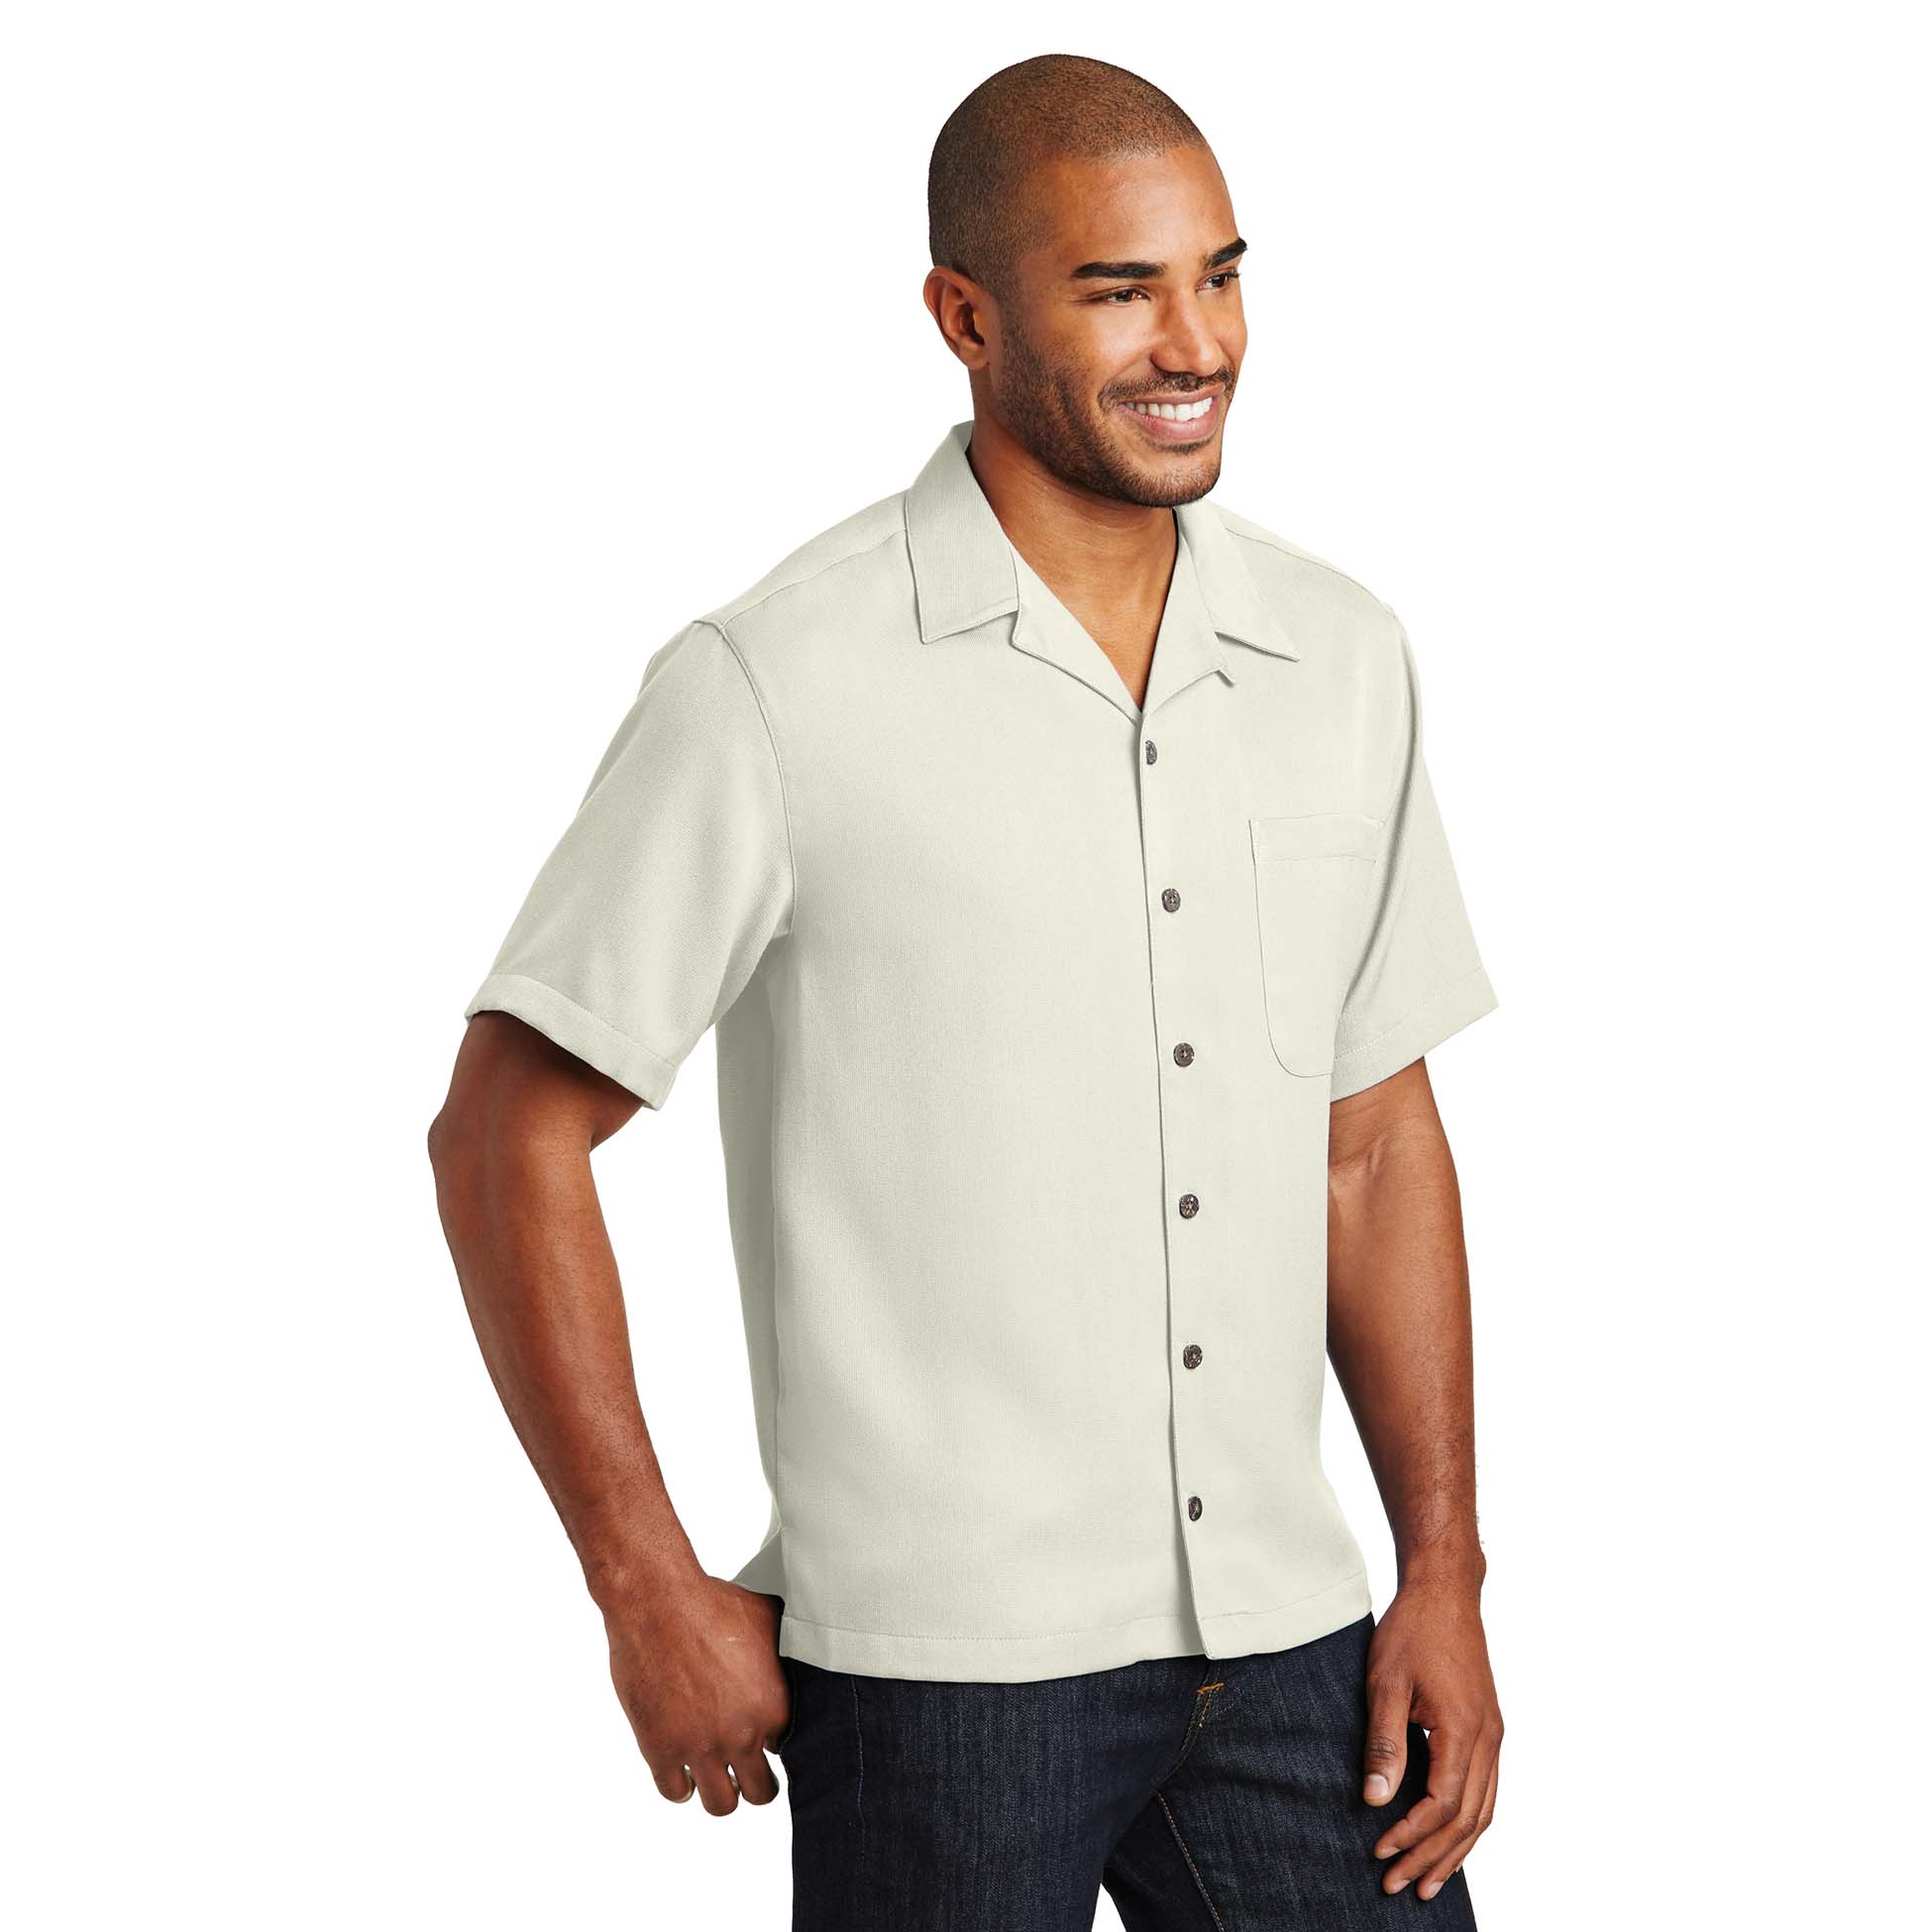 Port Authority S535 Easy Care Camp Shirt - Ivory | Full Source